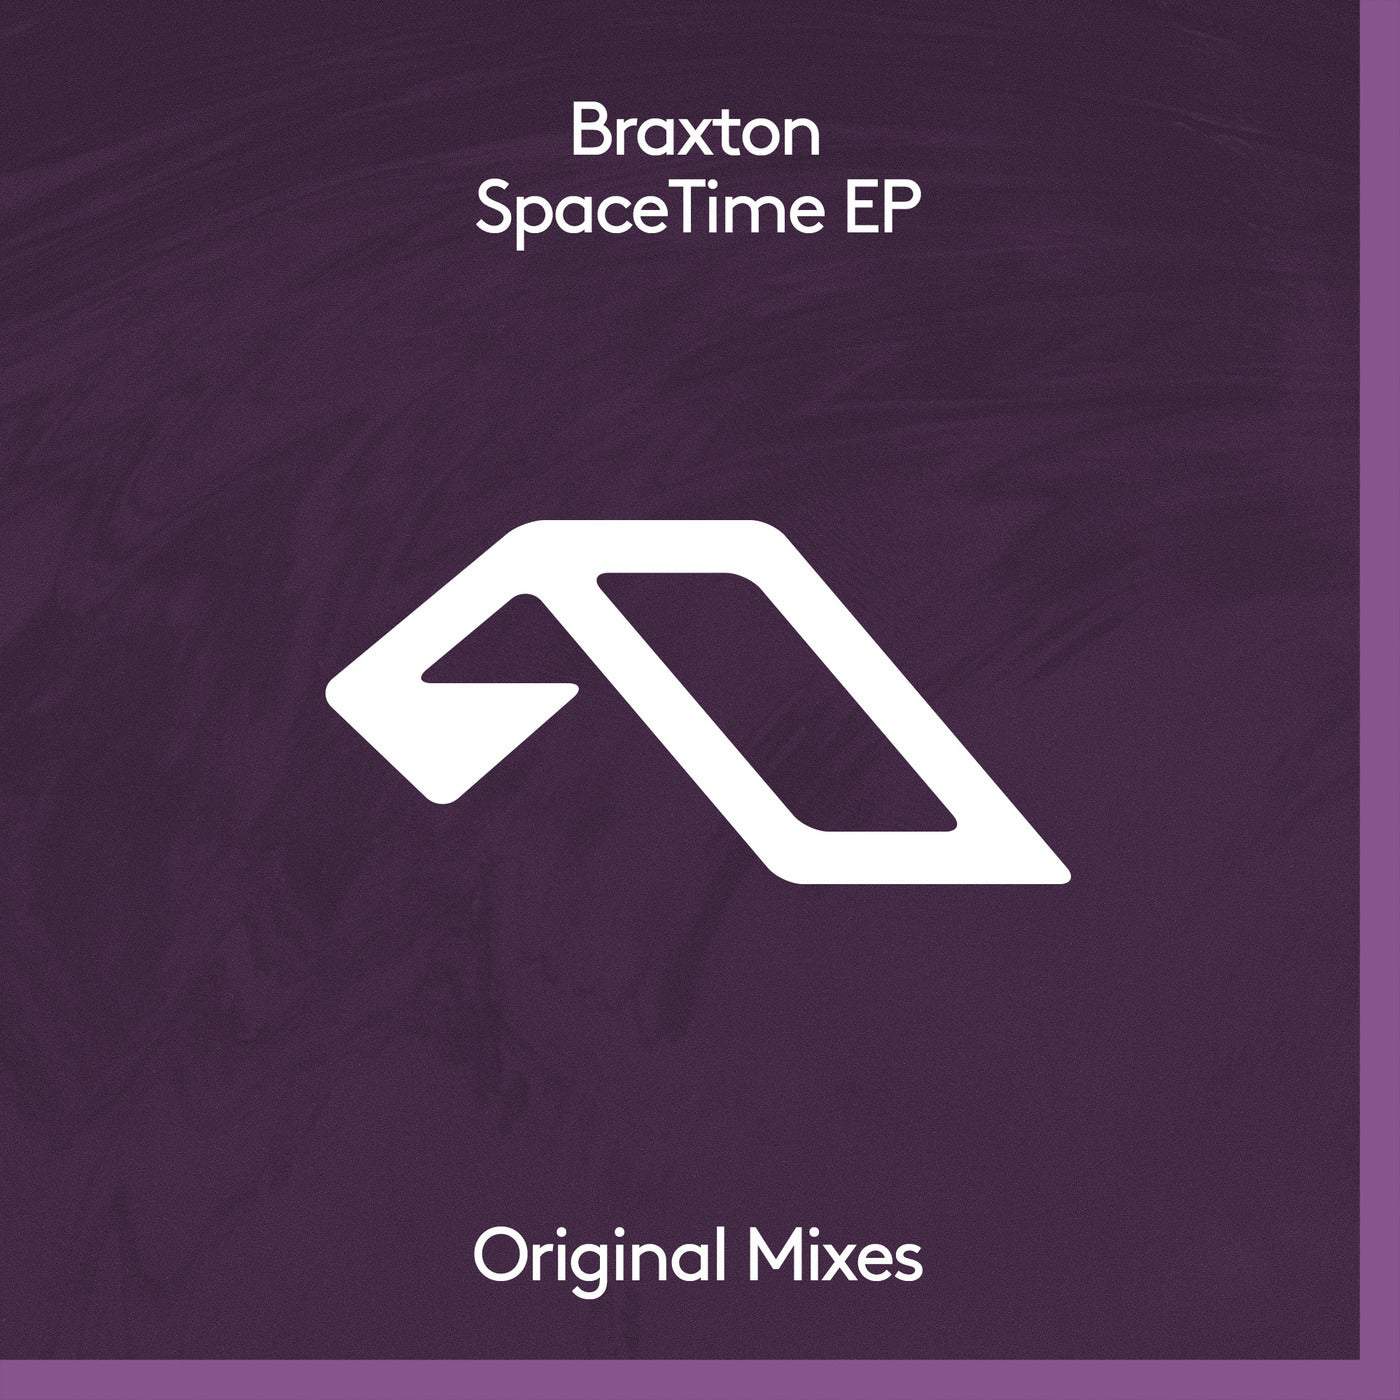 Download Jody Wisternoff, James Grant, Braxton - SpaceTime EP [ANJDEE702BD] on Electrobuzz